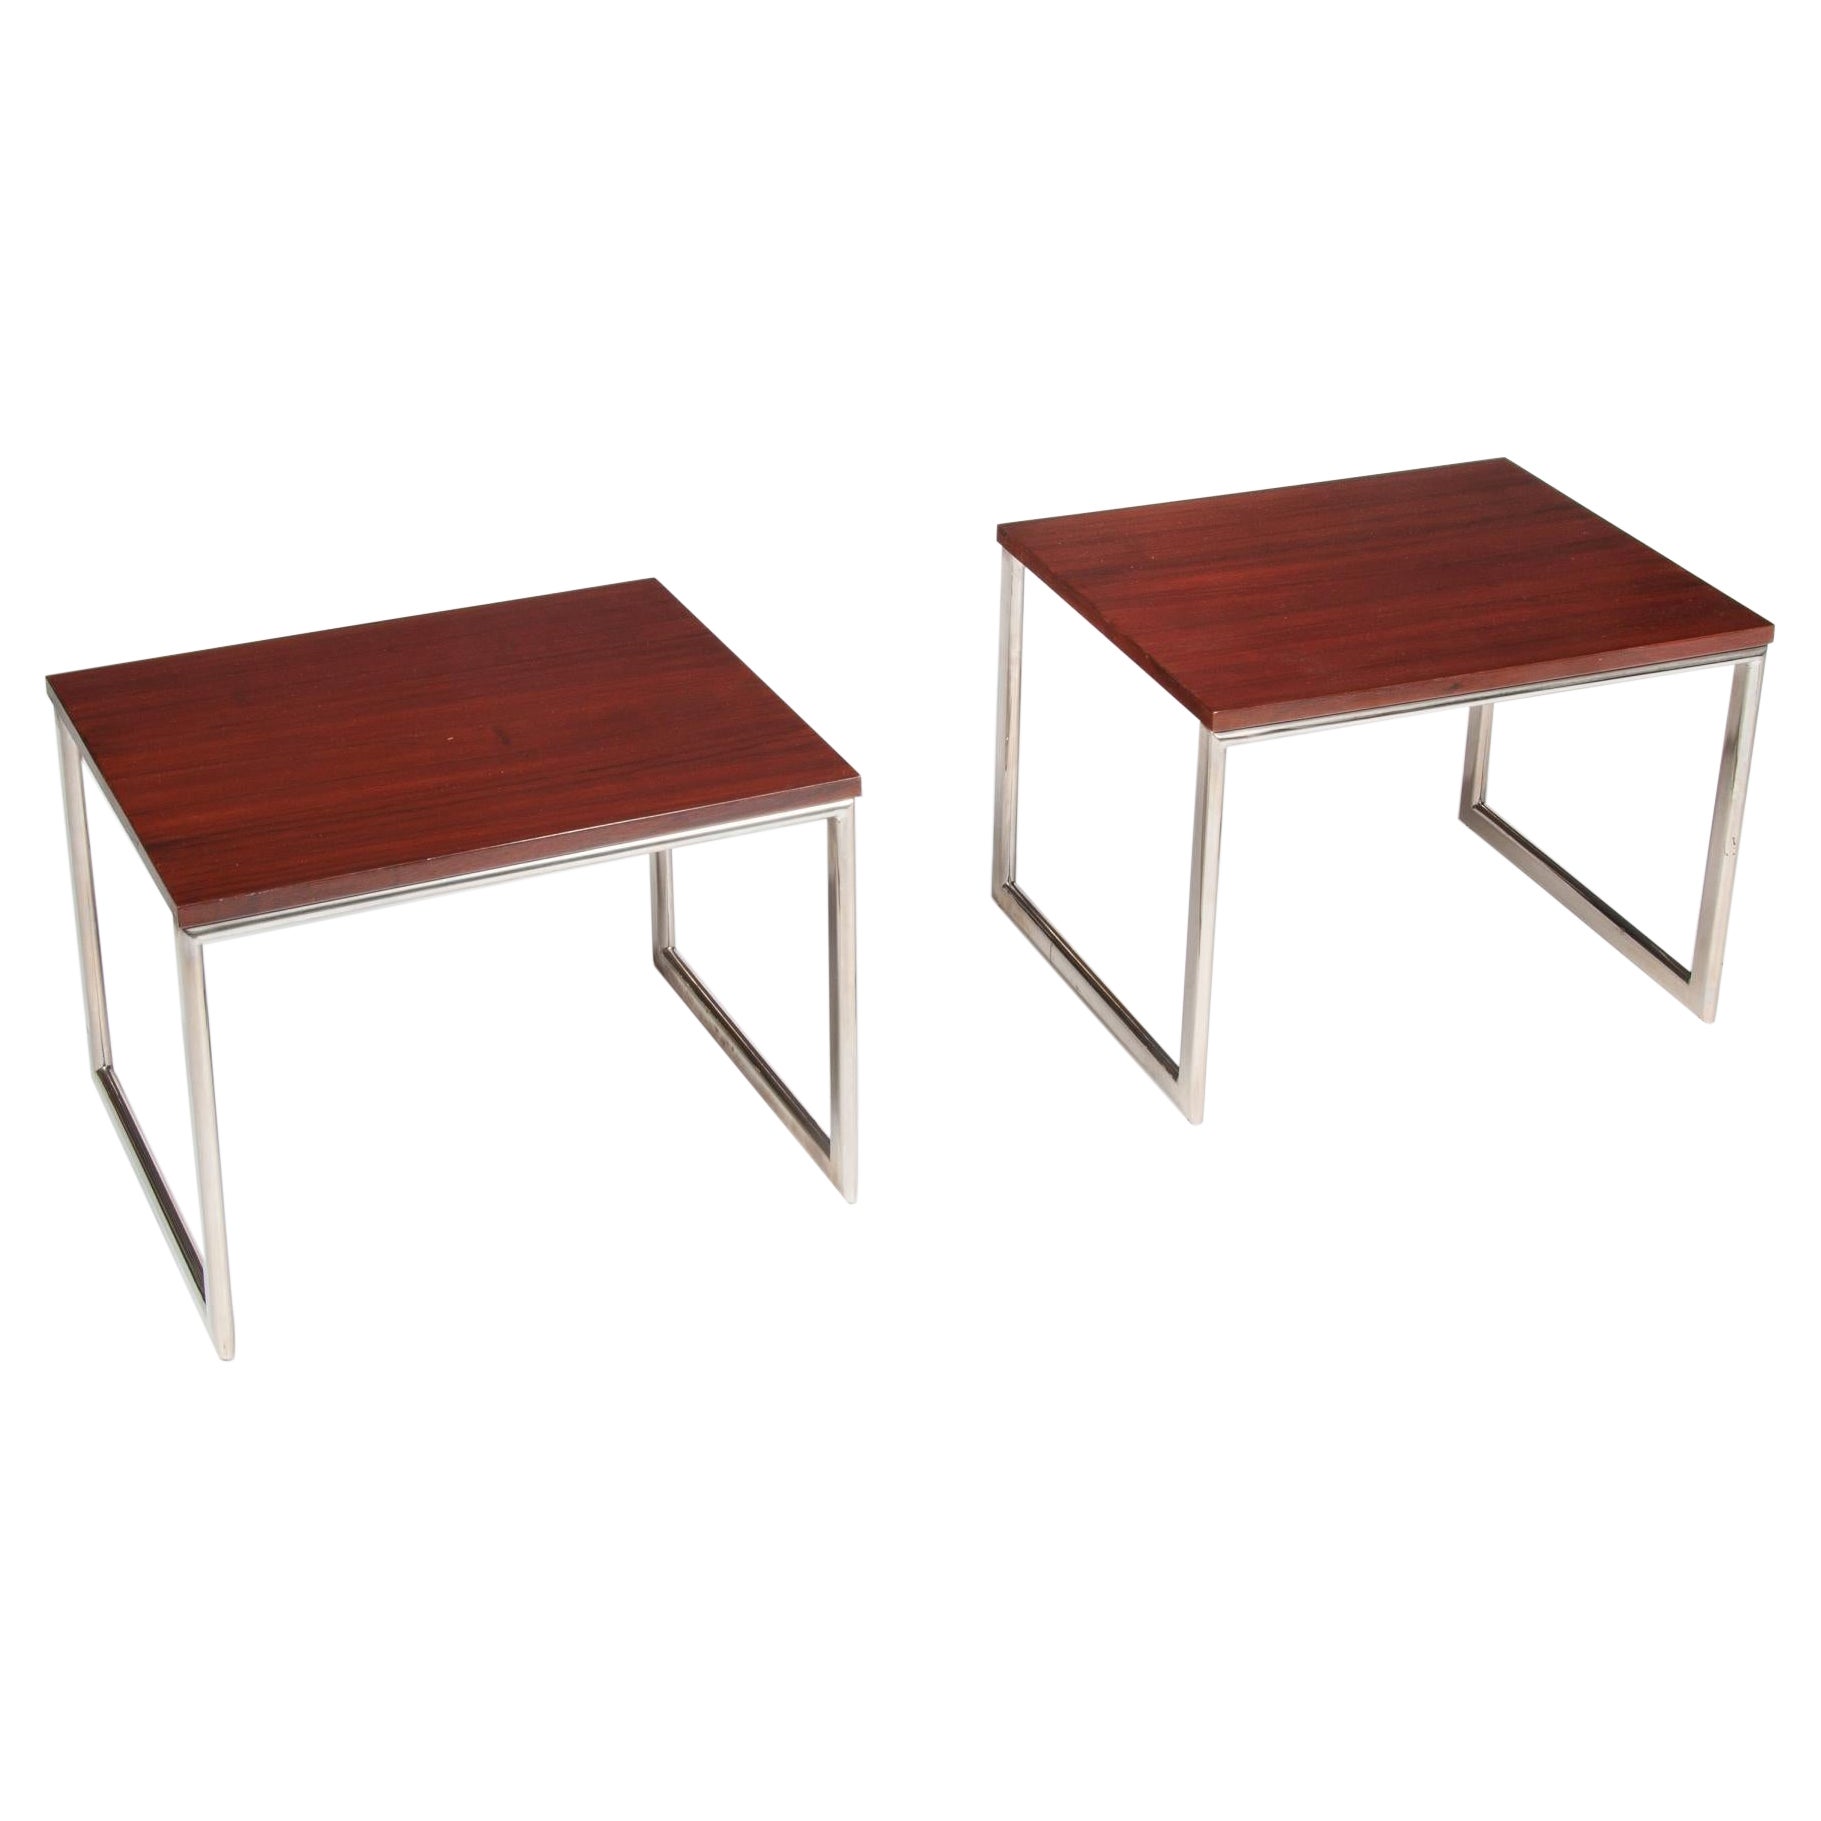 Pair of 1970s Teak and Chrome Side Tables